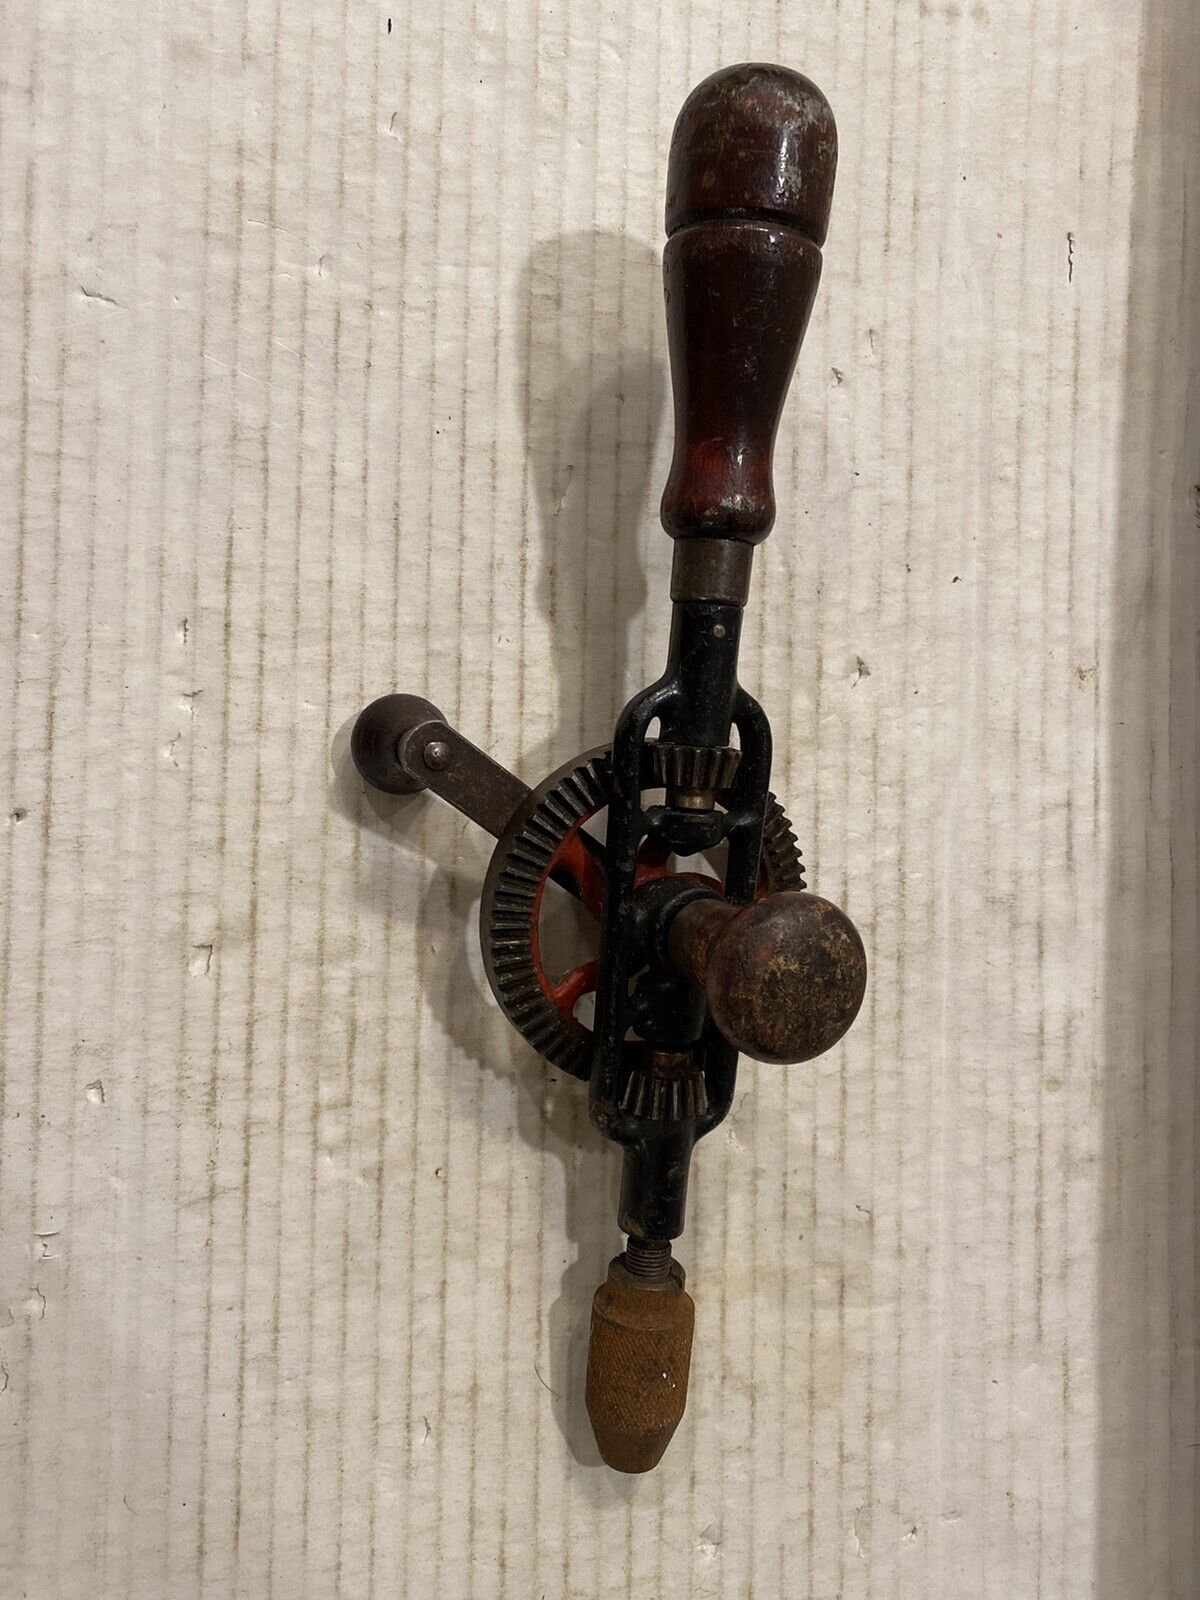 Antique MILLERS FALLS No 5 Egg Beater Hand Drill Vintage Bx29